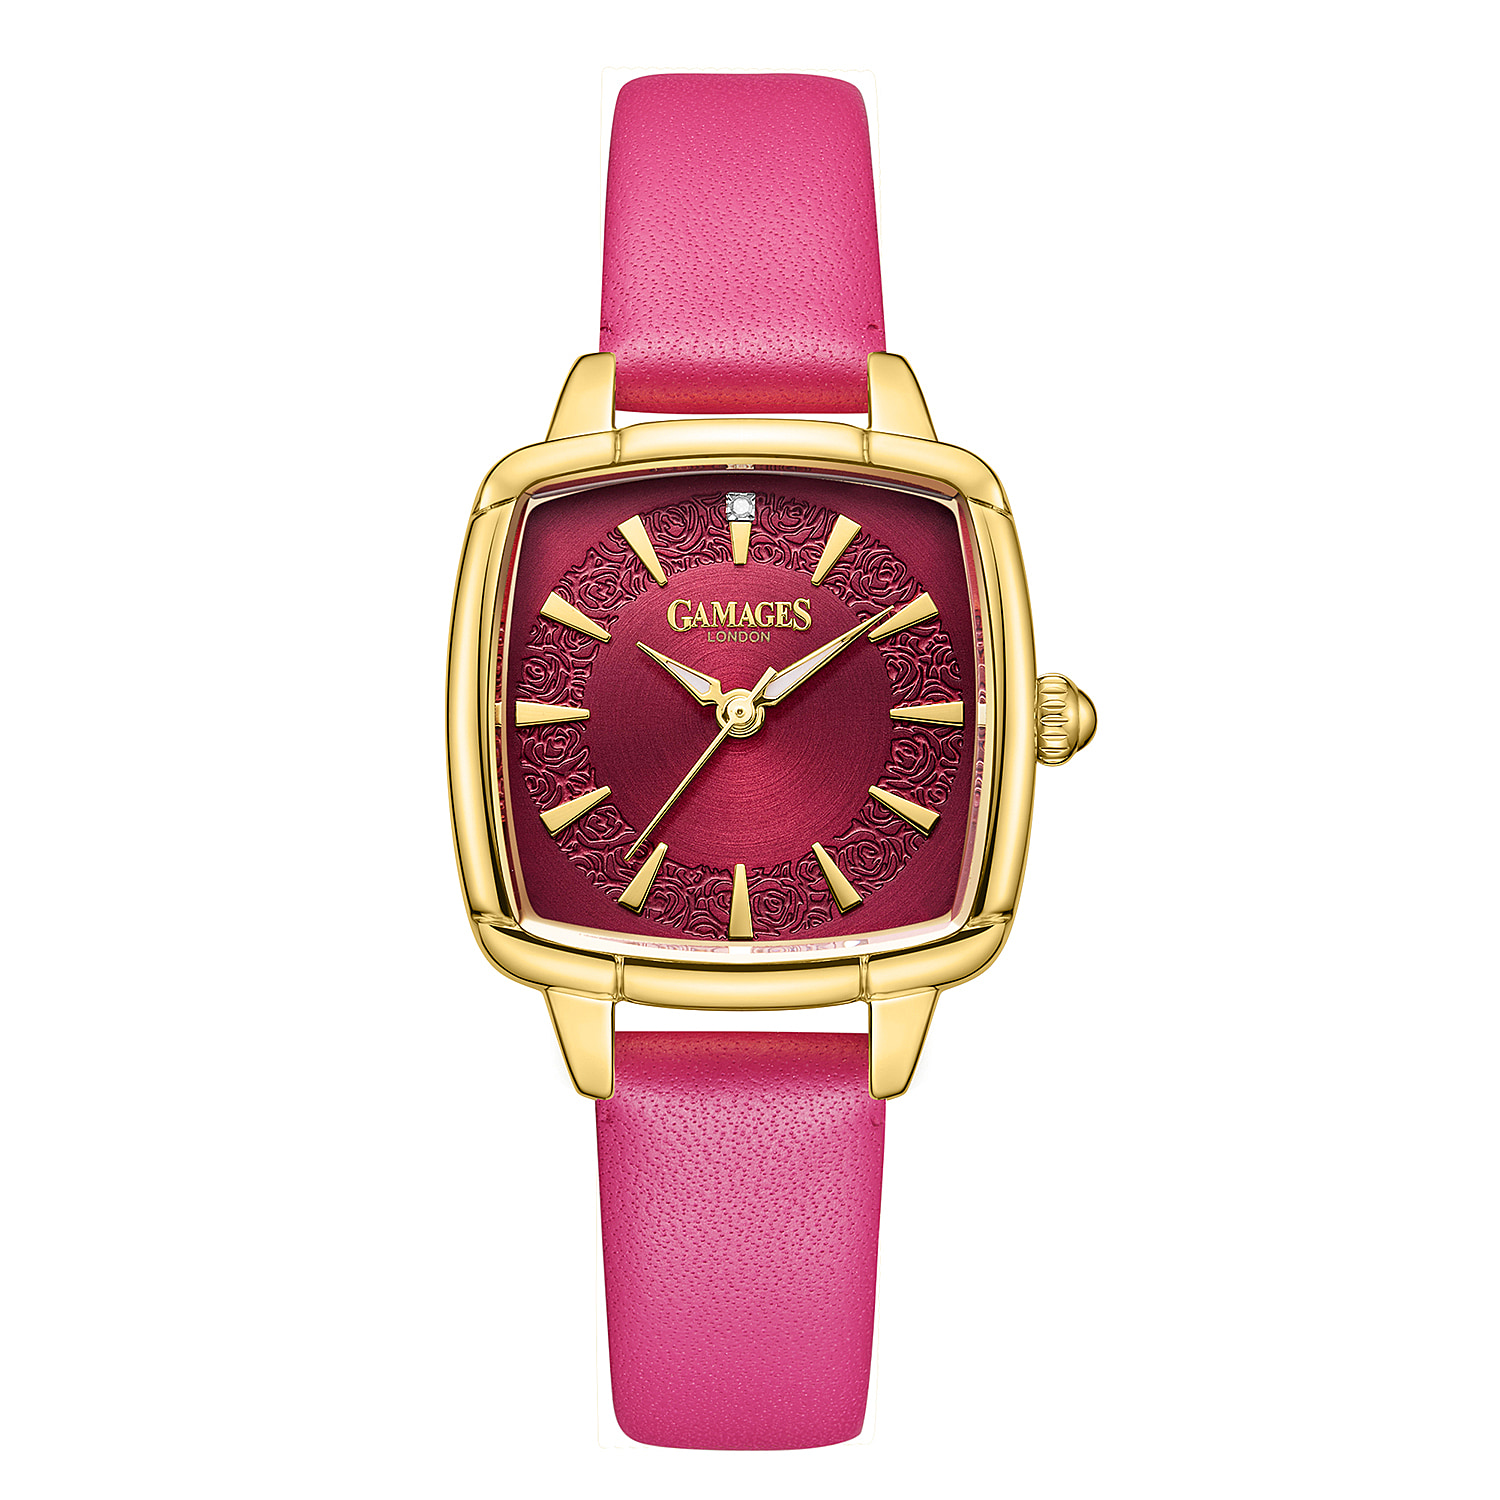 Gamages Of London Limited Edition Swiss Movement ELOQUENT Diamond Studded Gold Raspberry Dial Water ResistantWatch with Pink Leather Strap